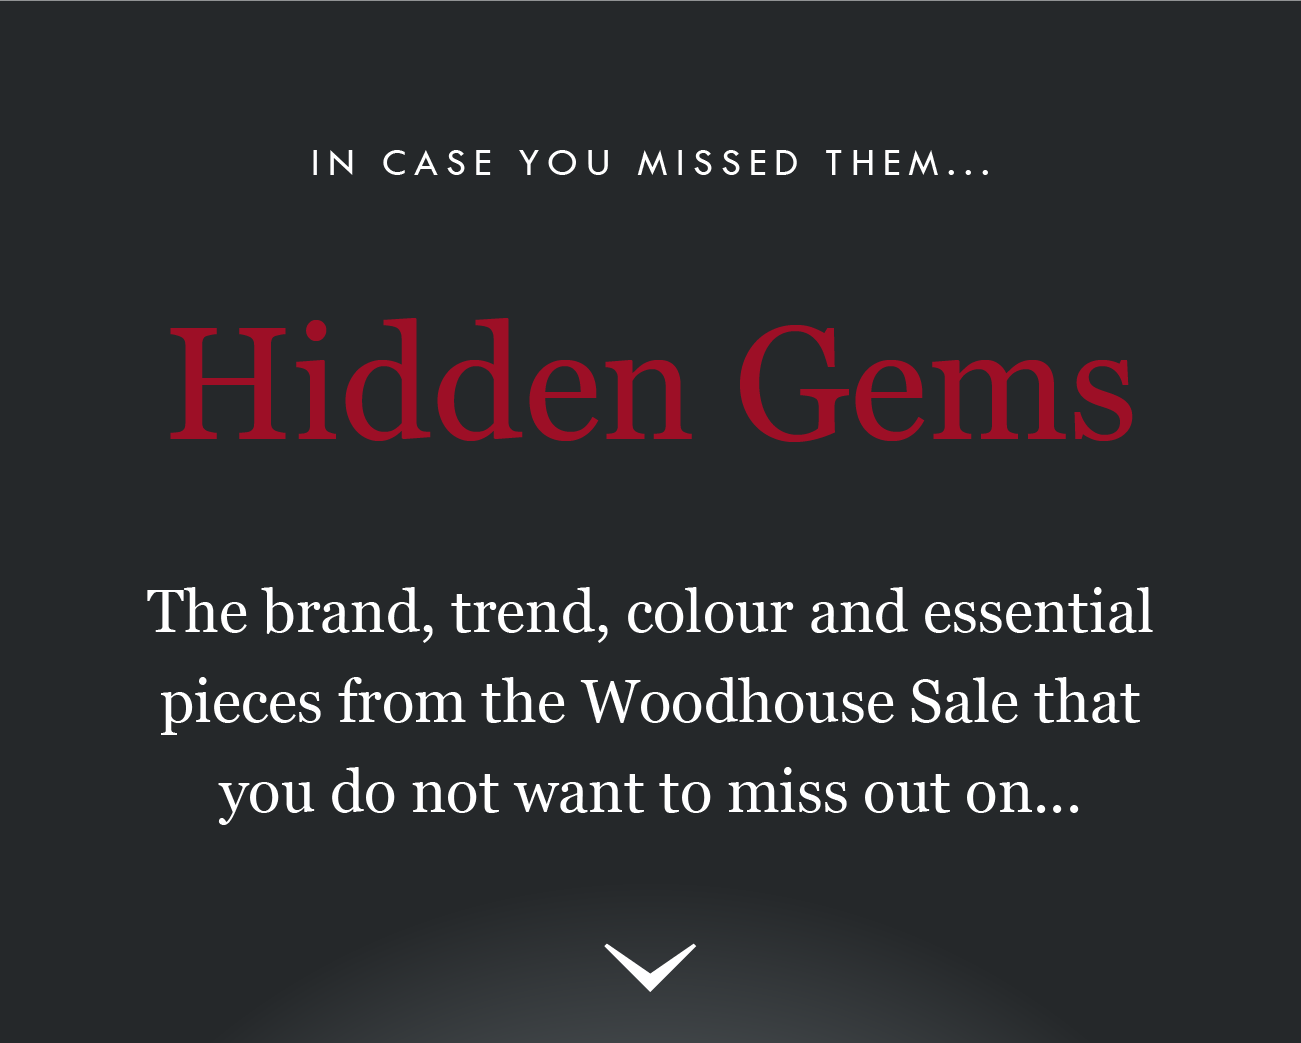 IN CASE YOU MISSED THEM.. .

Hidden Gems
The brand, trend, colour and essential
pieces from the Woodhouse Sale that
you do not want to miss out on...